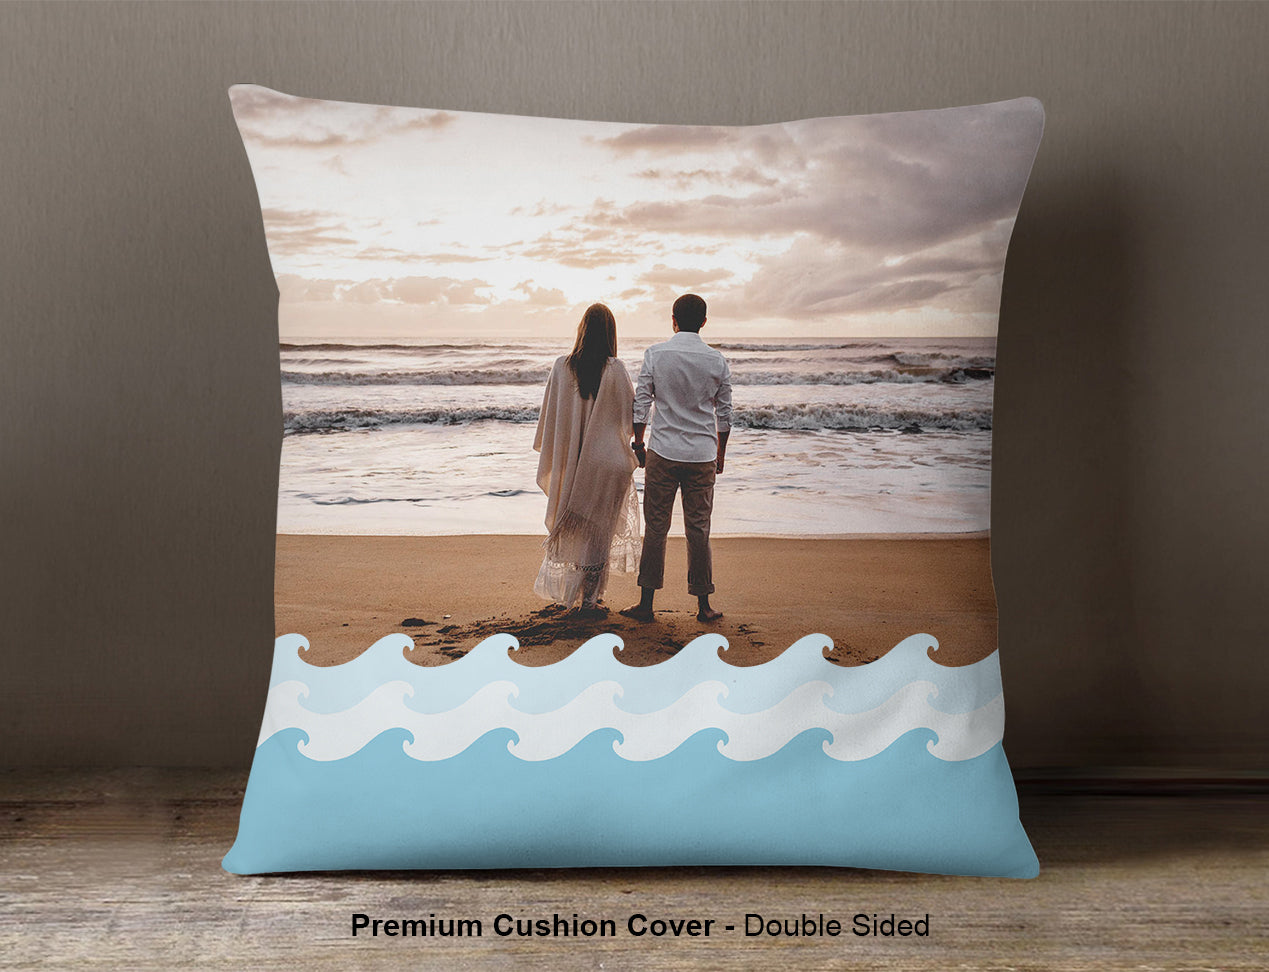 Premium Cushion cover with image of couple on beach and wave design